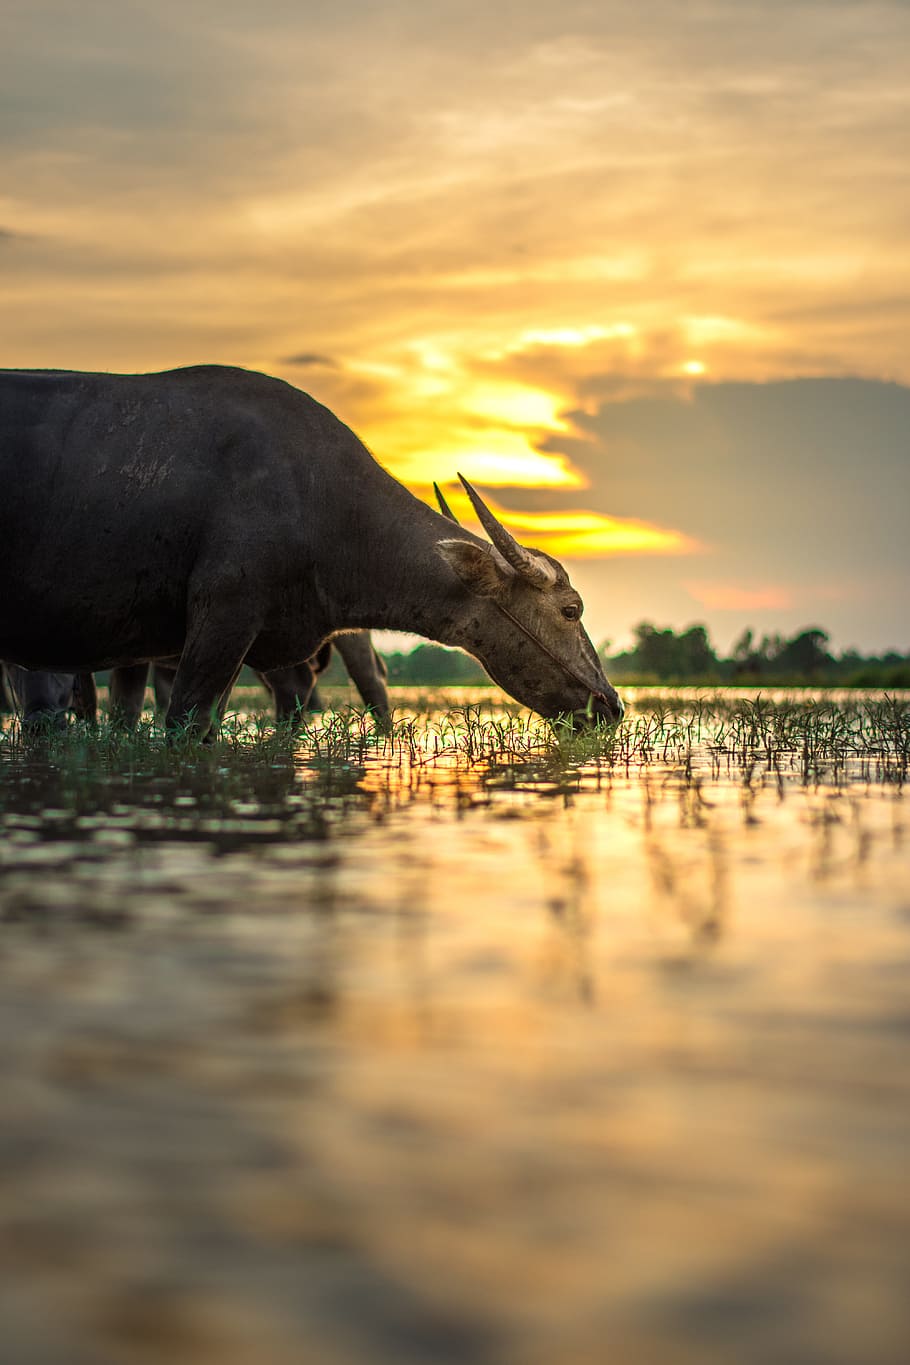 water buffalo eating grass on field during golden hour, Outside